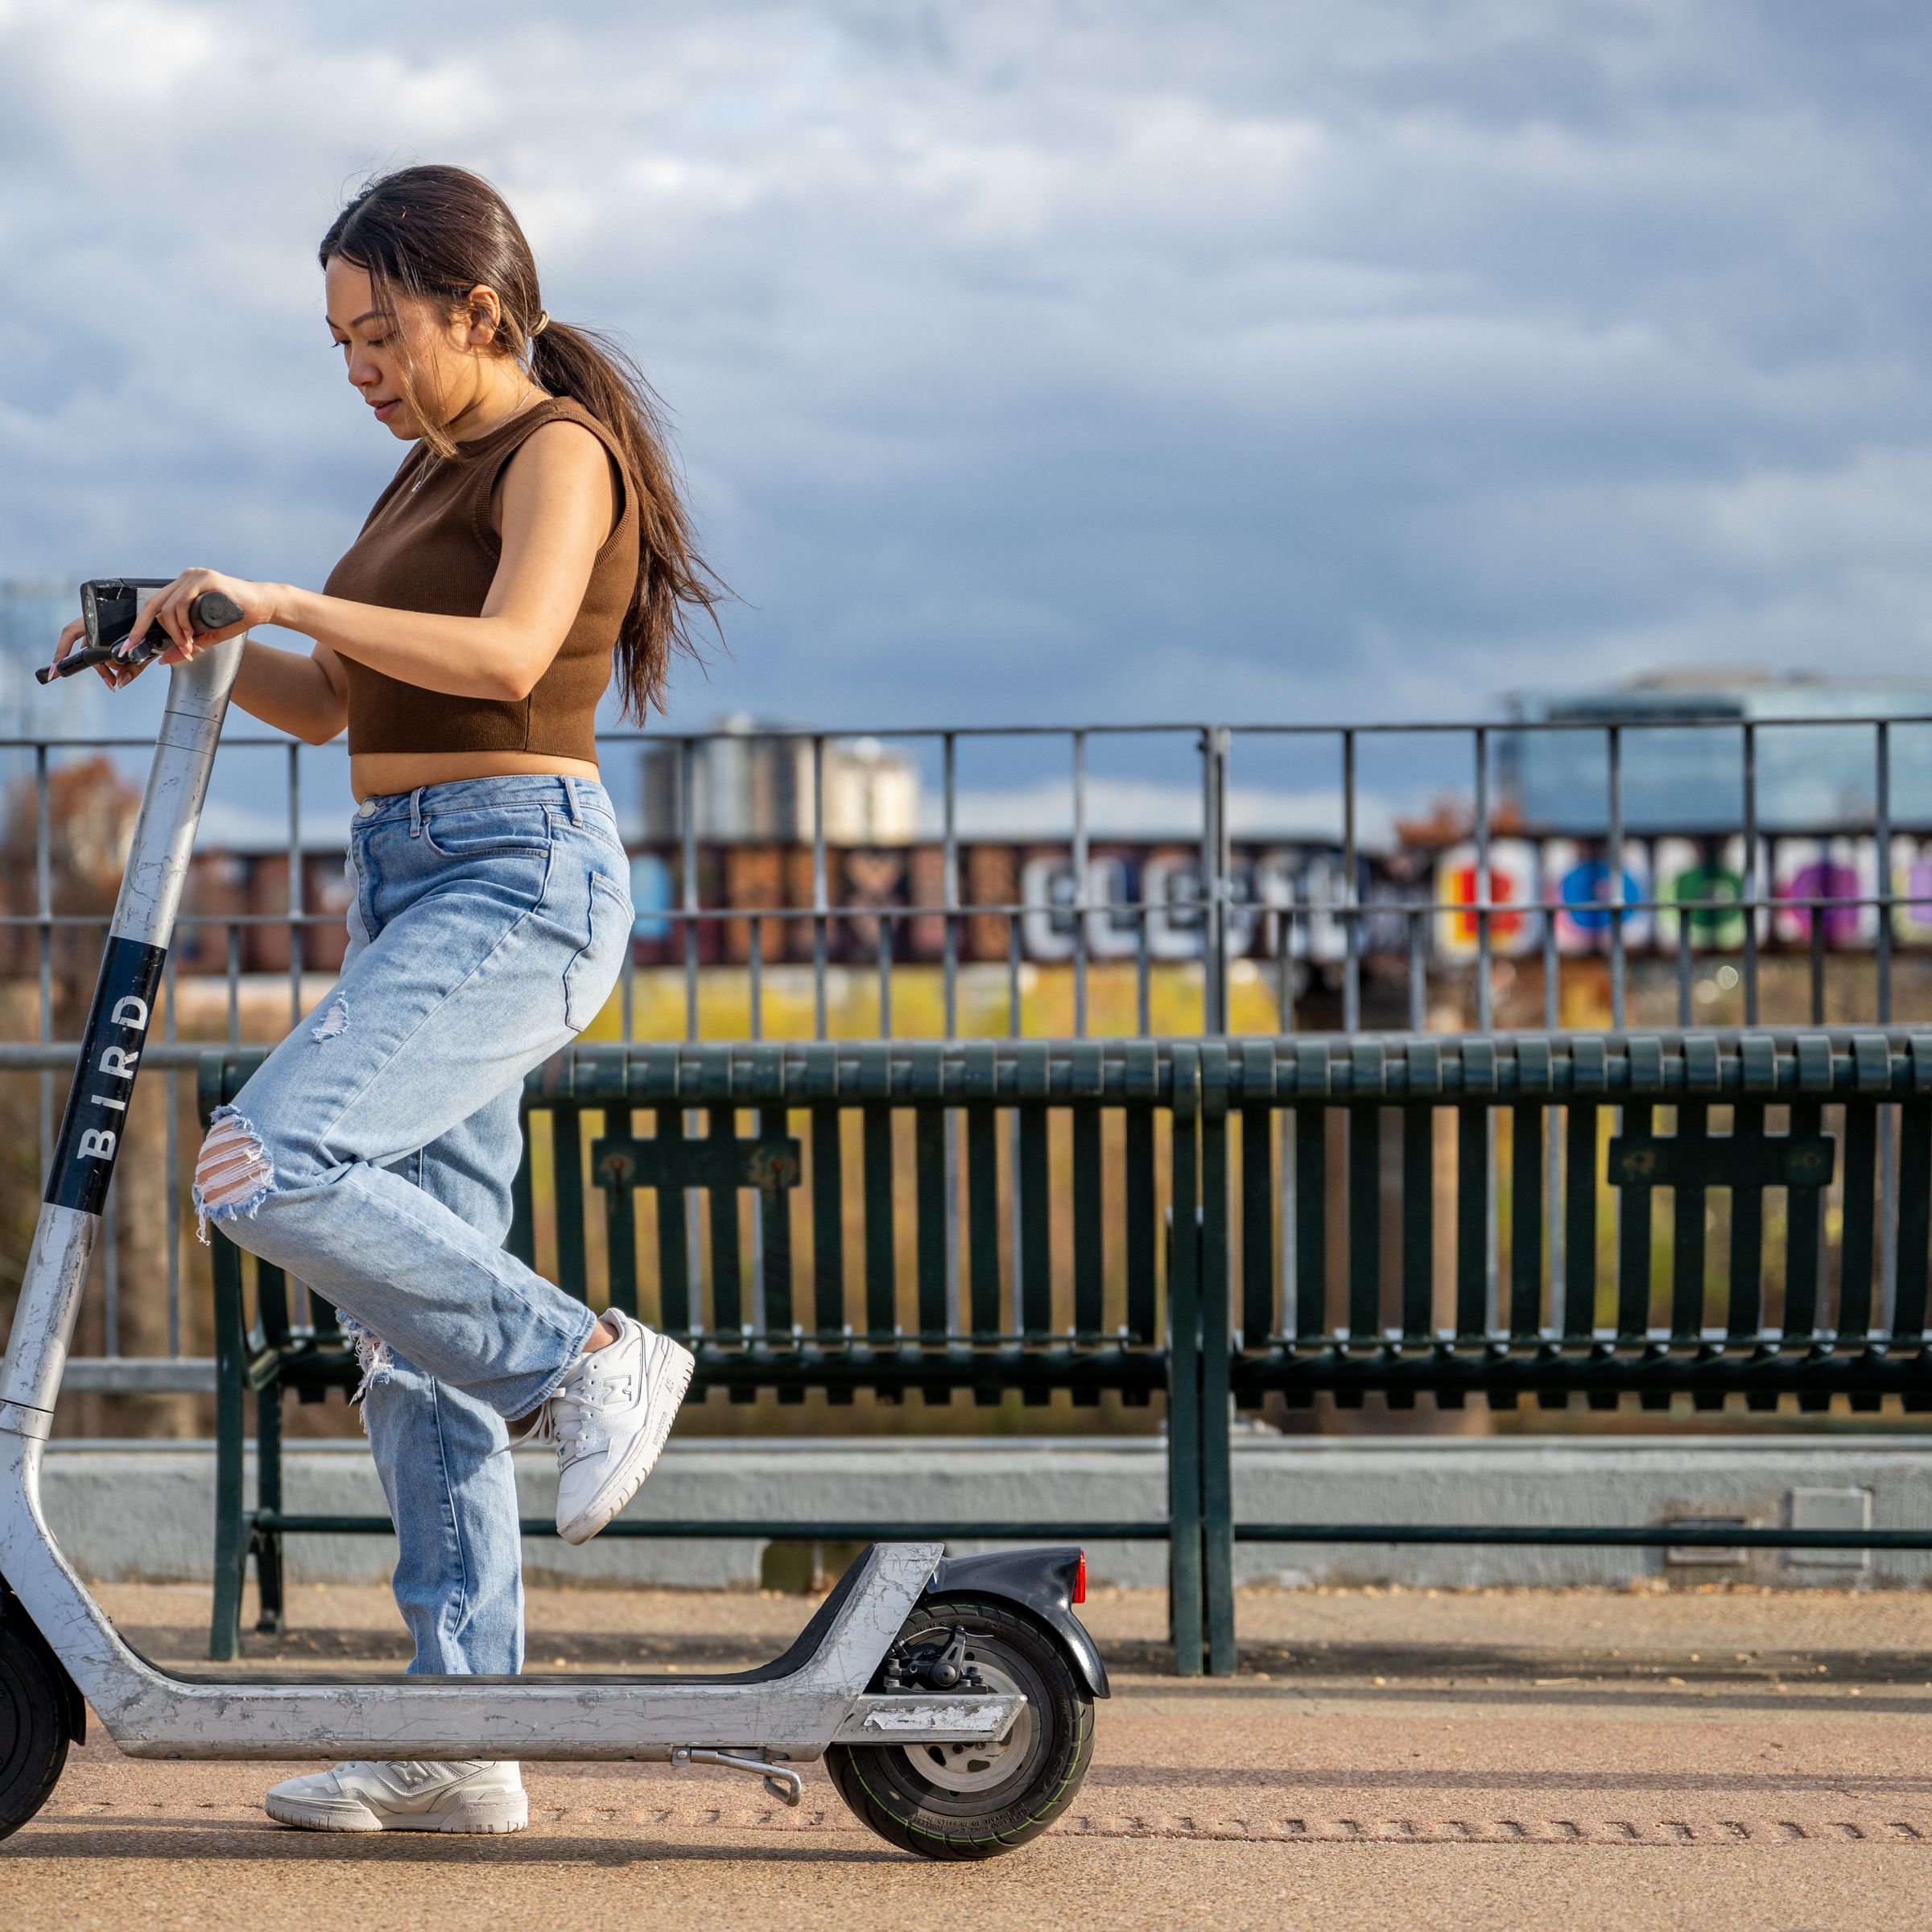 Electric Scooter Company Bird Files For Bankruptcy